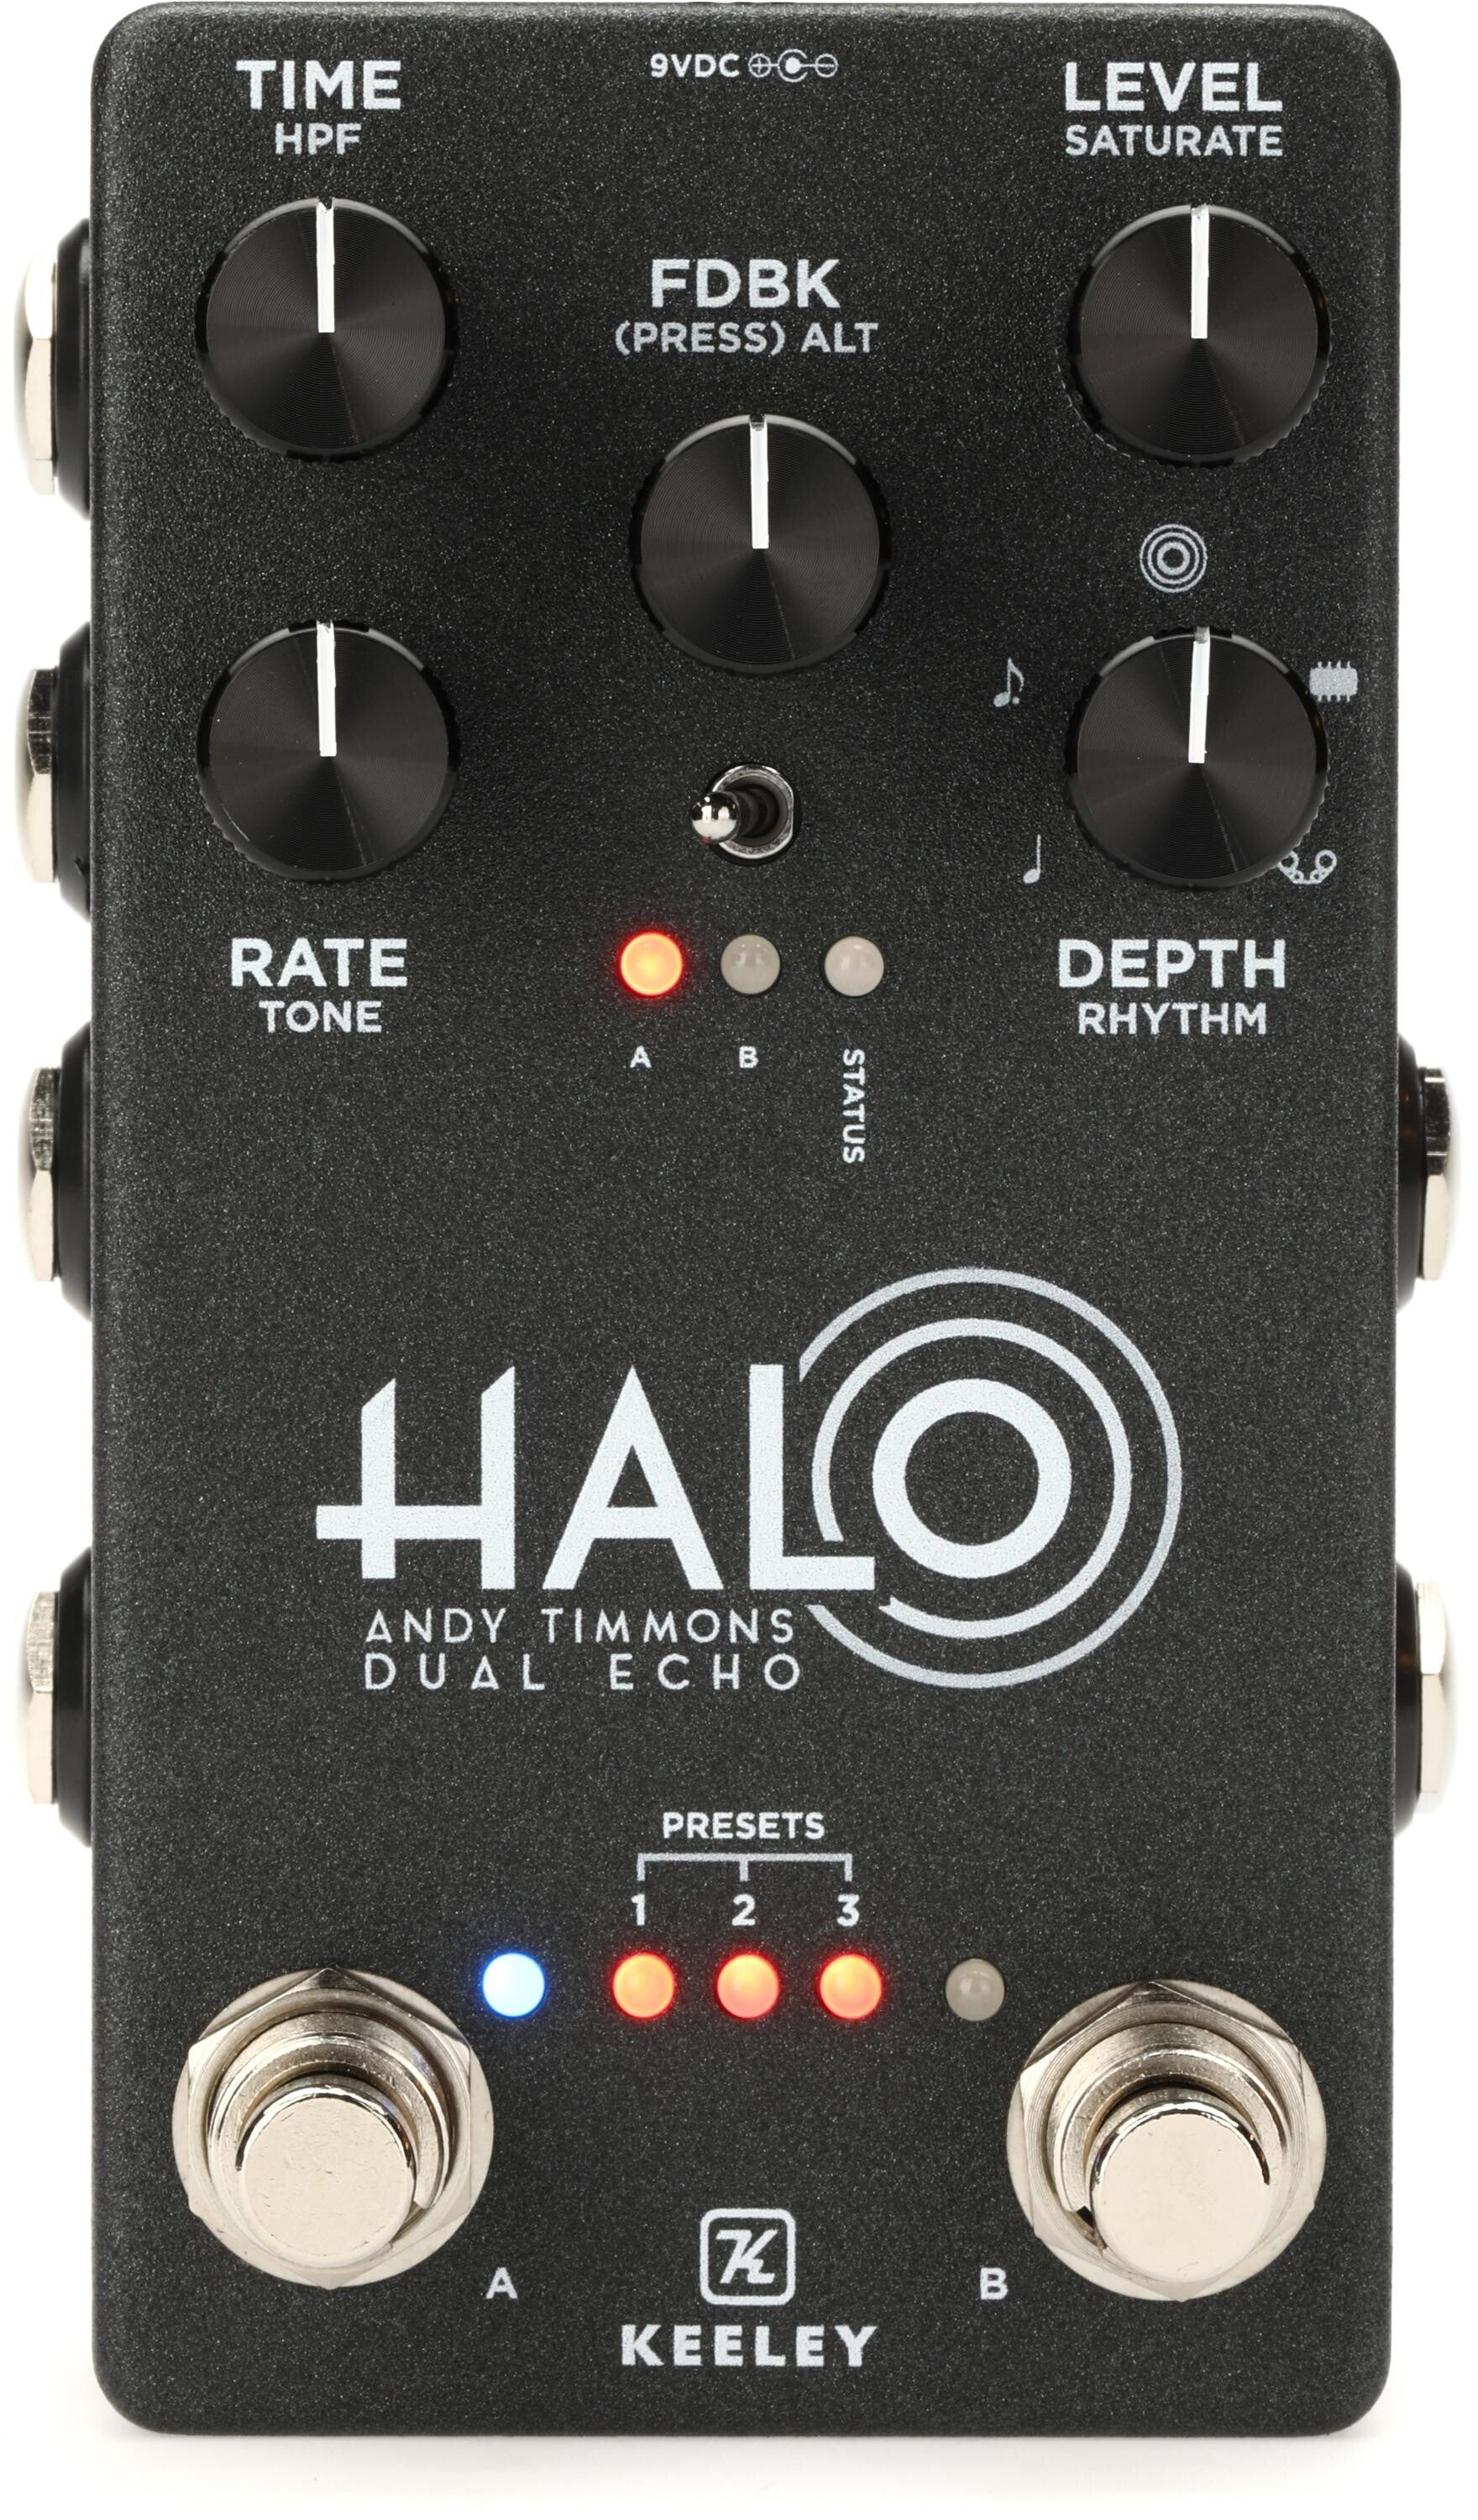 Bundled Item: Keeley Halo Andy Timmons Dual Echo Pedal